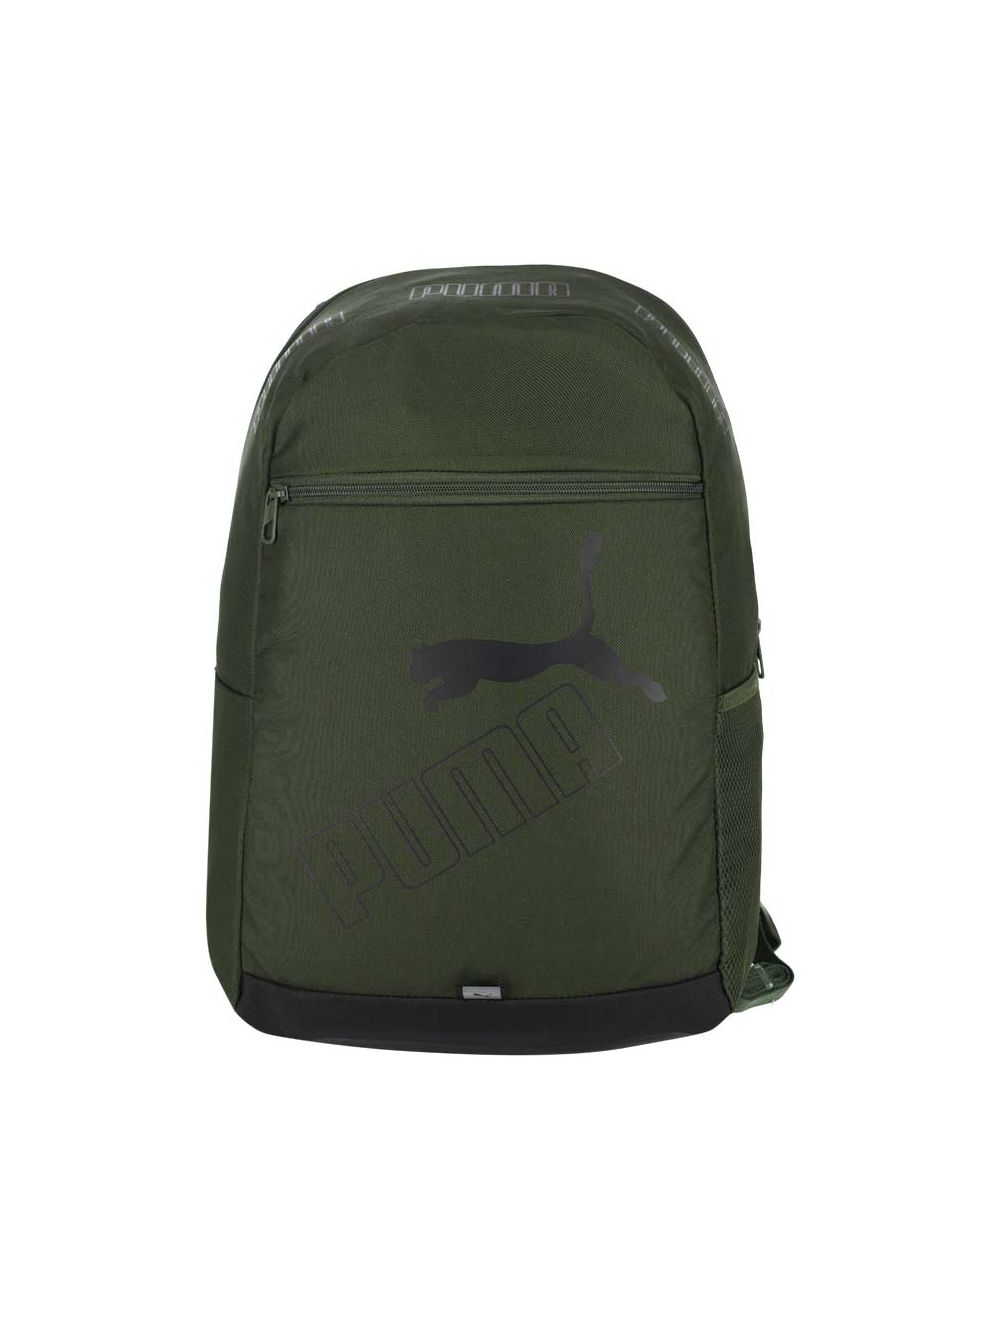 PUMA backpack Phase Backpack S Puma Black - sand Dune - AOP | Buy bags,  purses & accessories online | modeherz